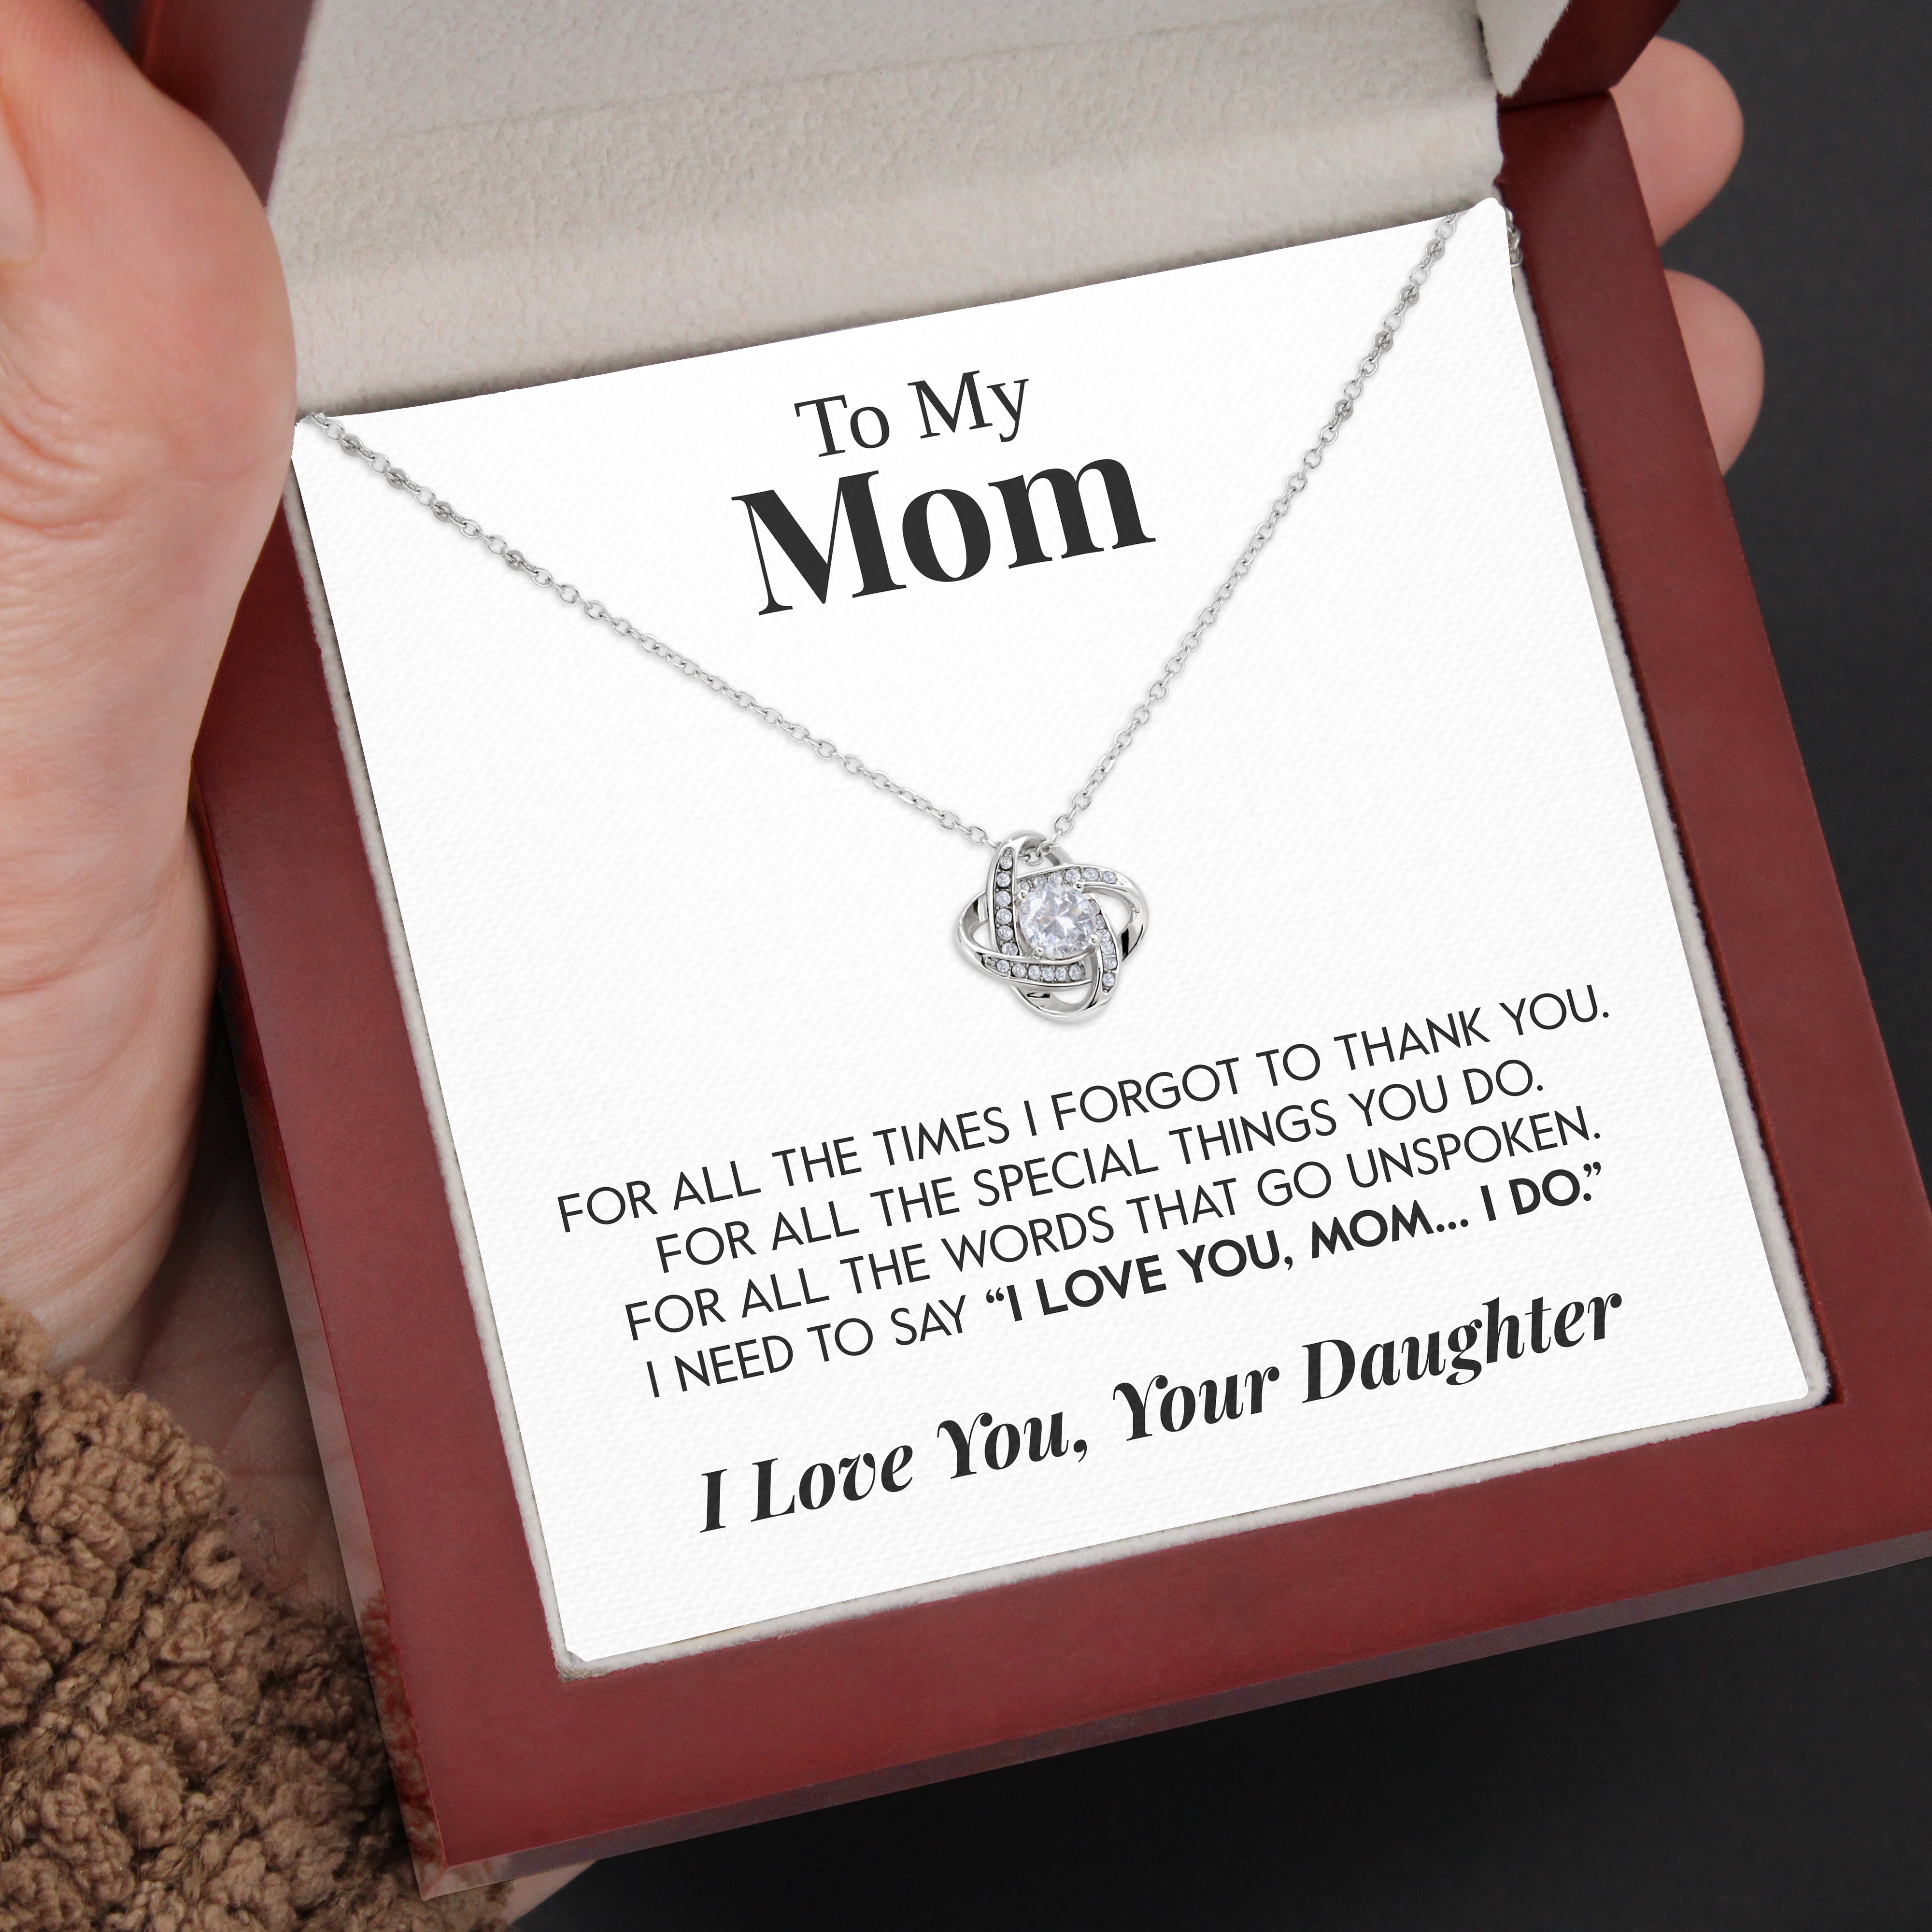 To My Mom | "I Love You" | Love Knot Necklace